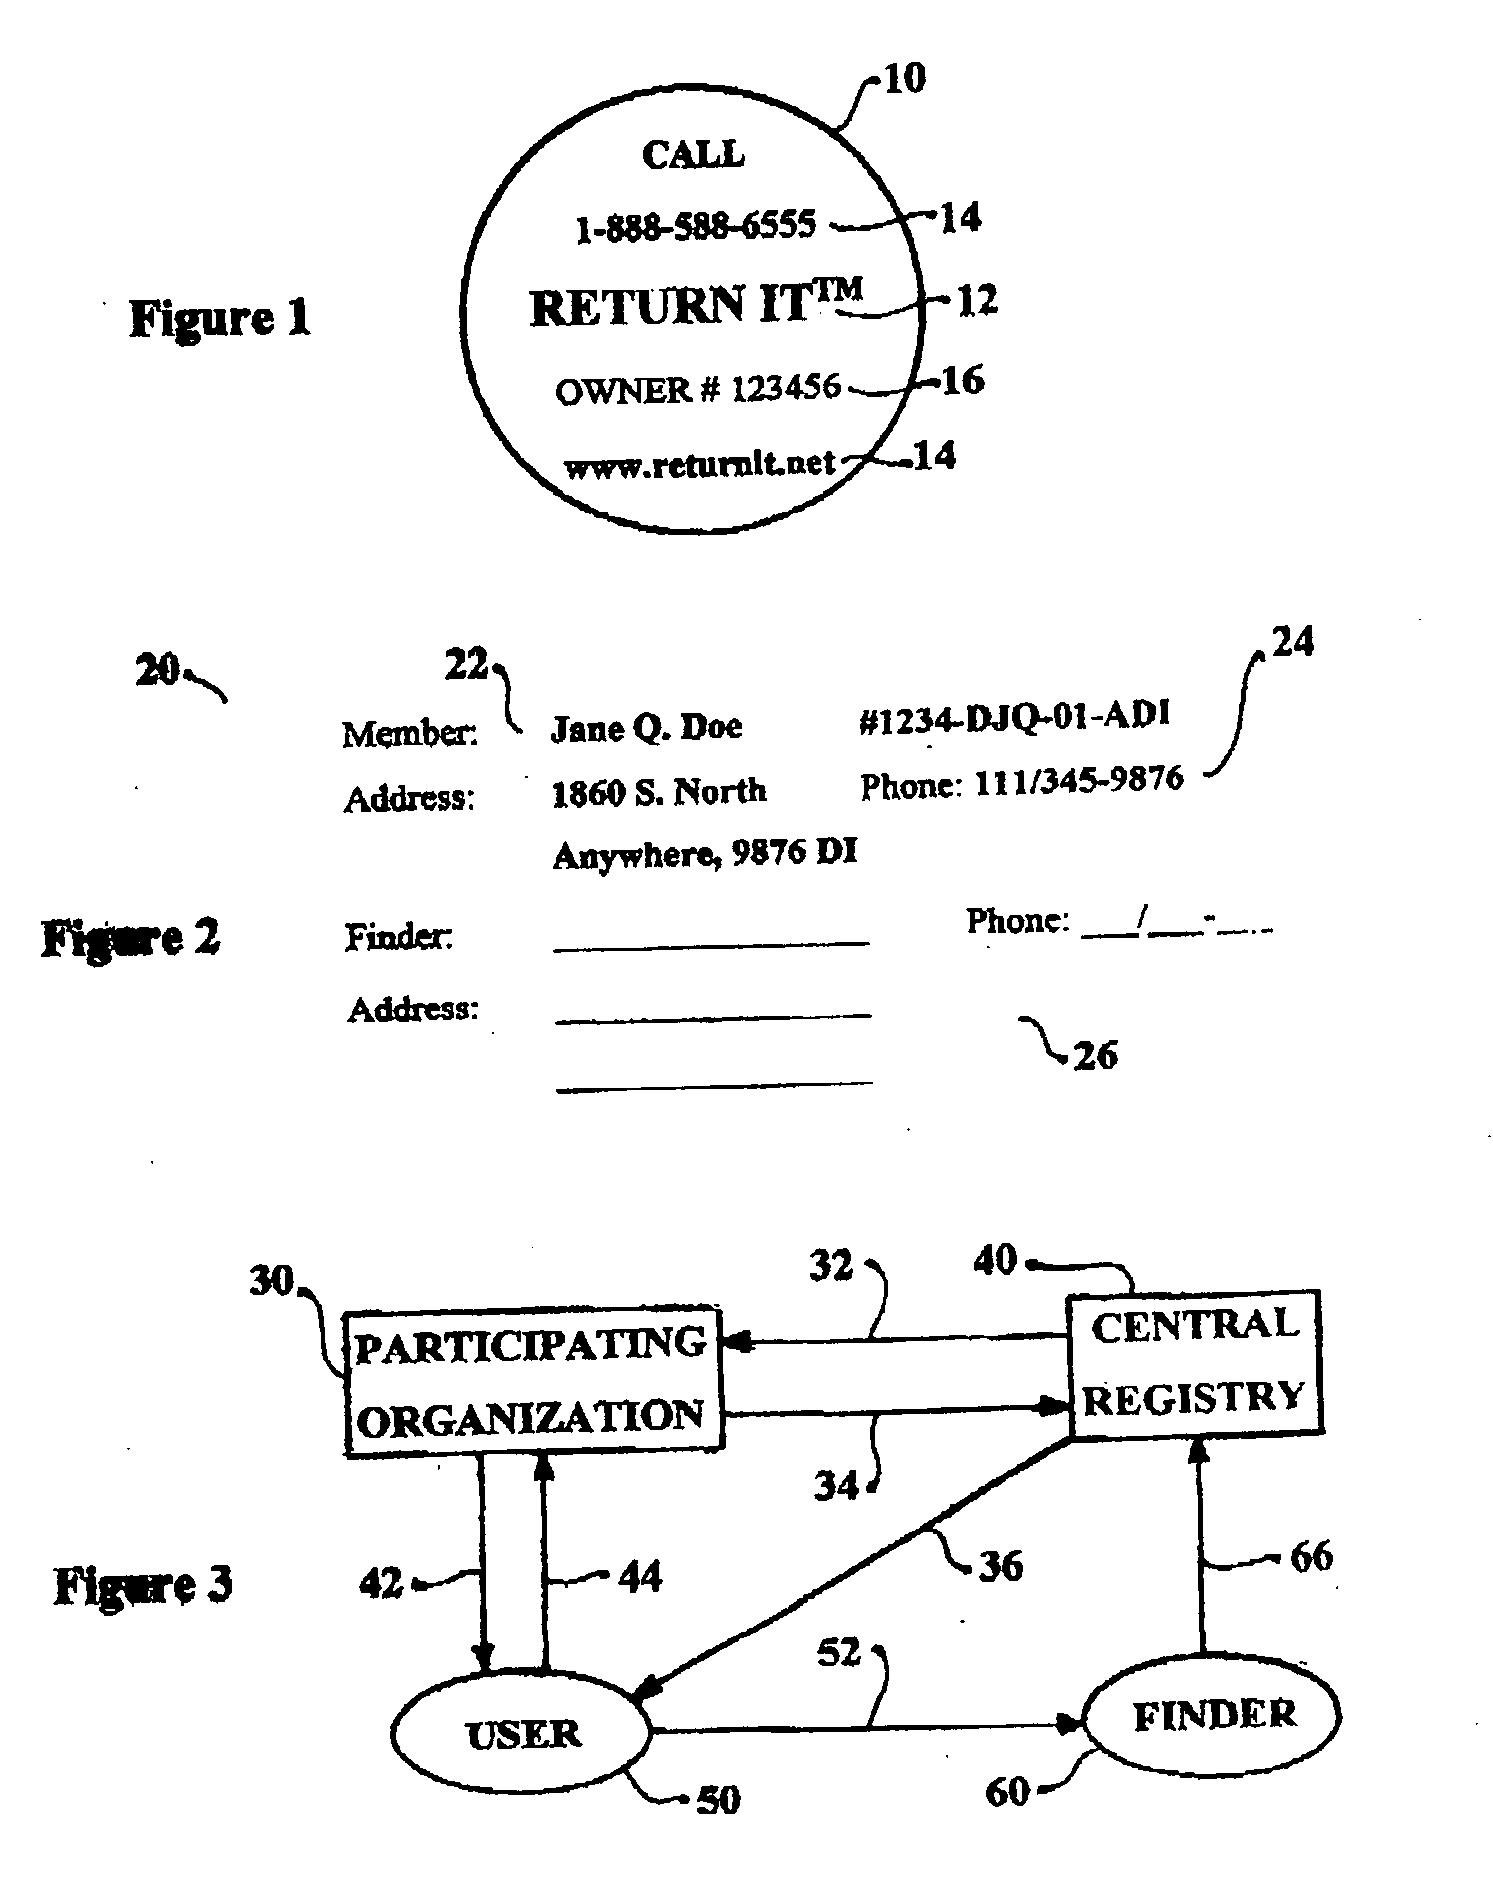 Label system and method for returning lost articles